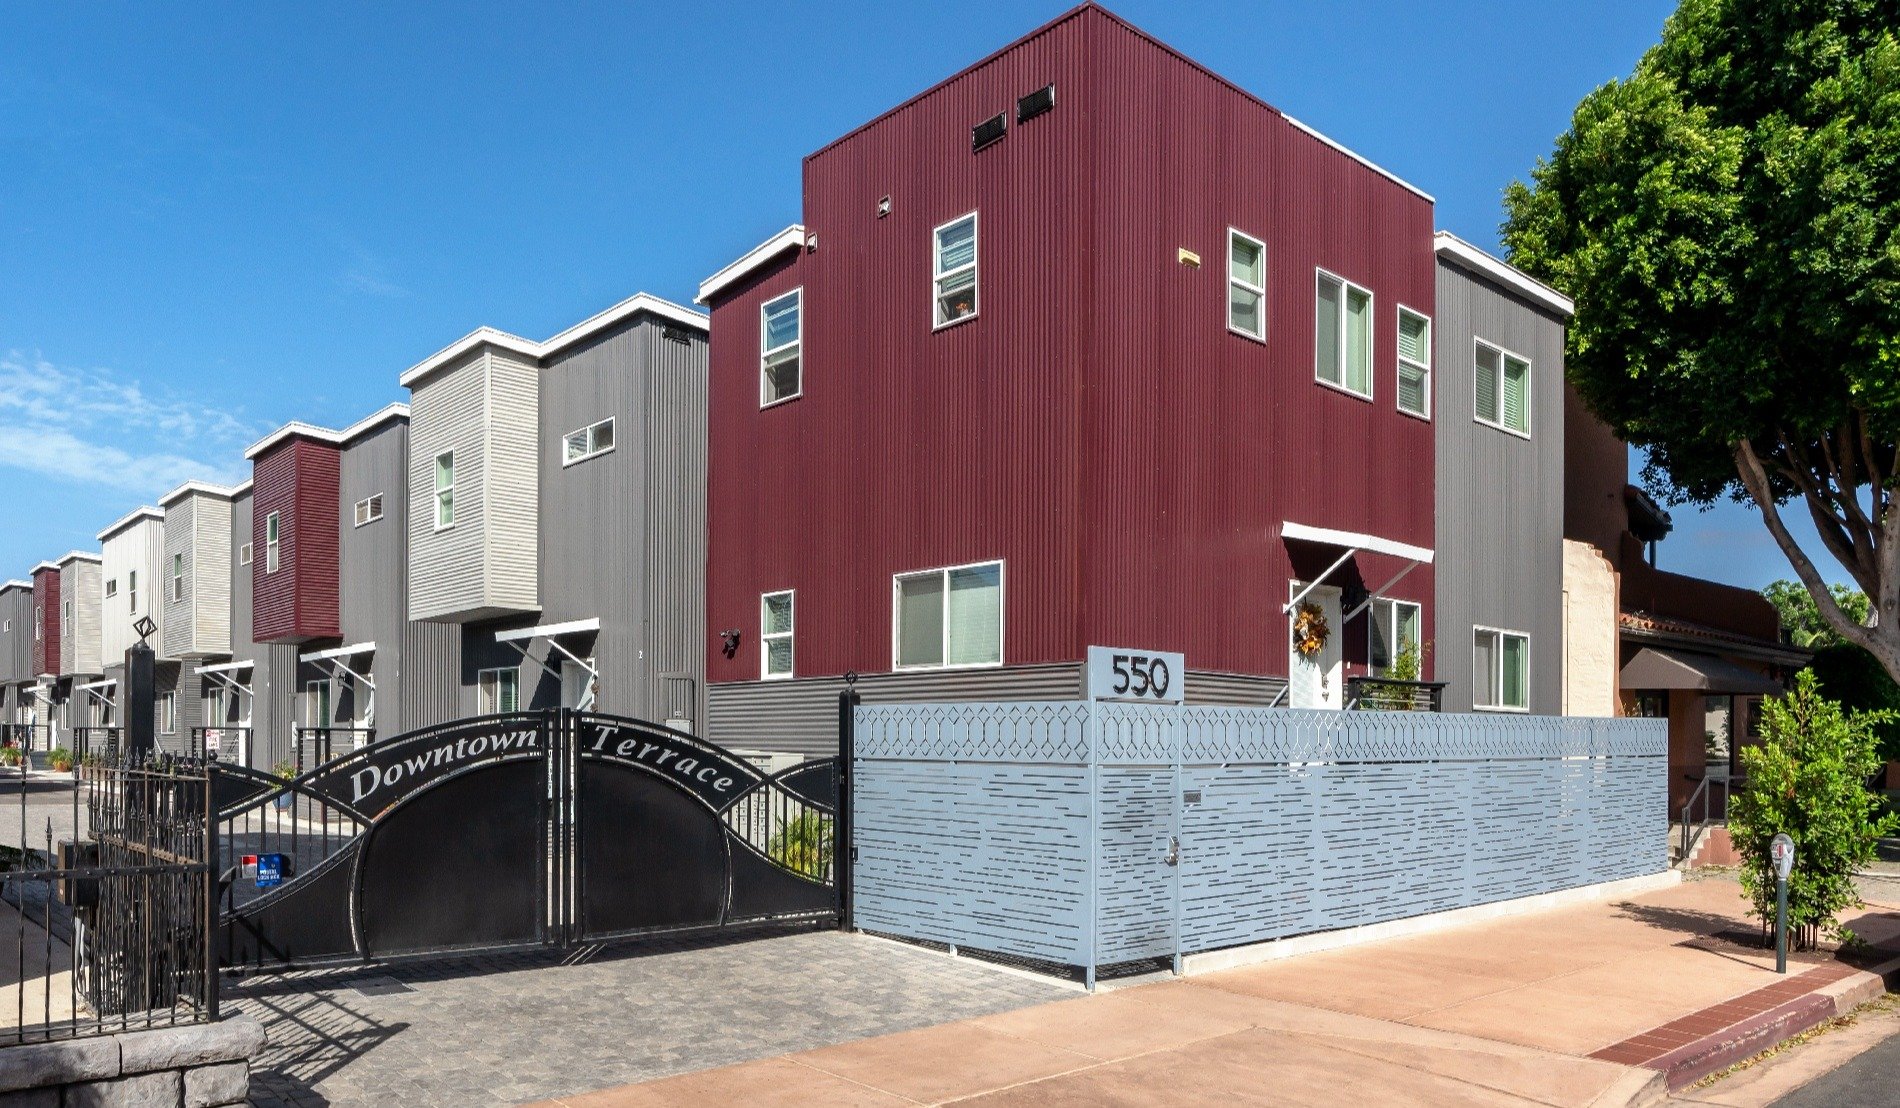 Corrugated Panels Provide Contemporary Aesthetic for California Apartments